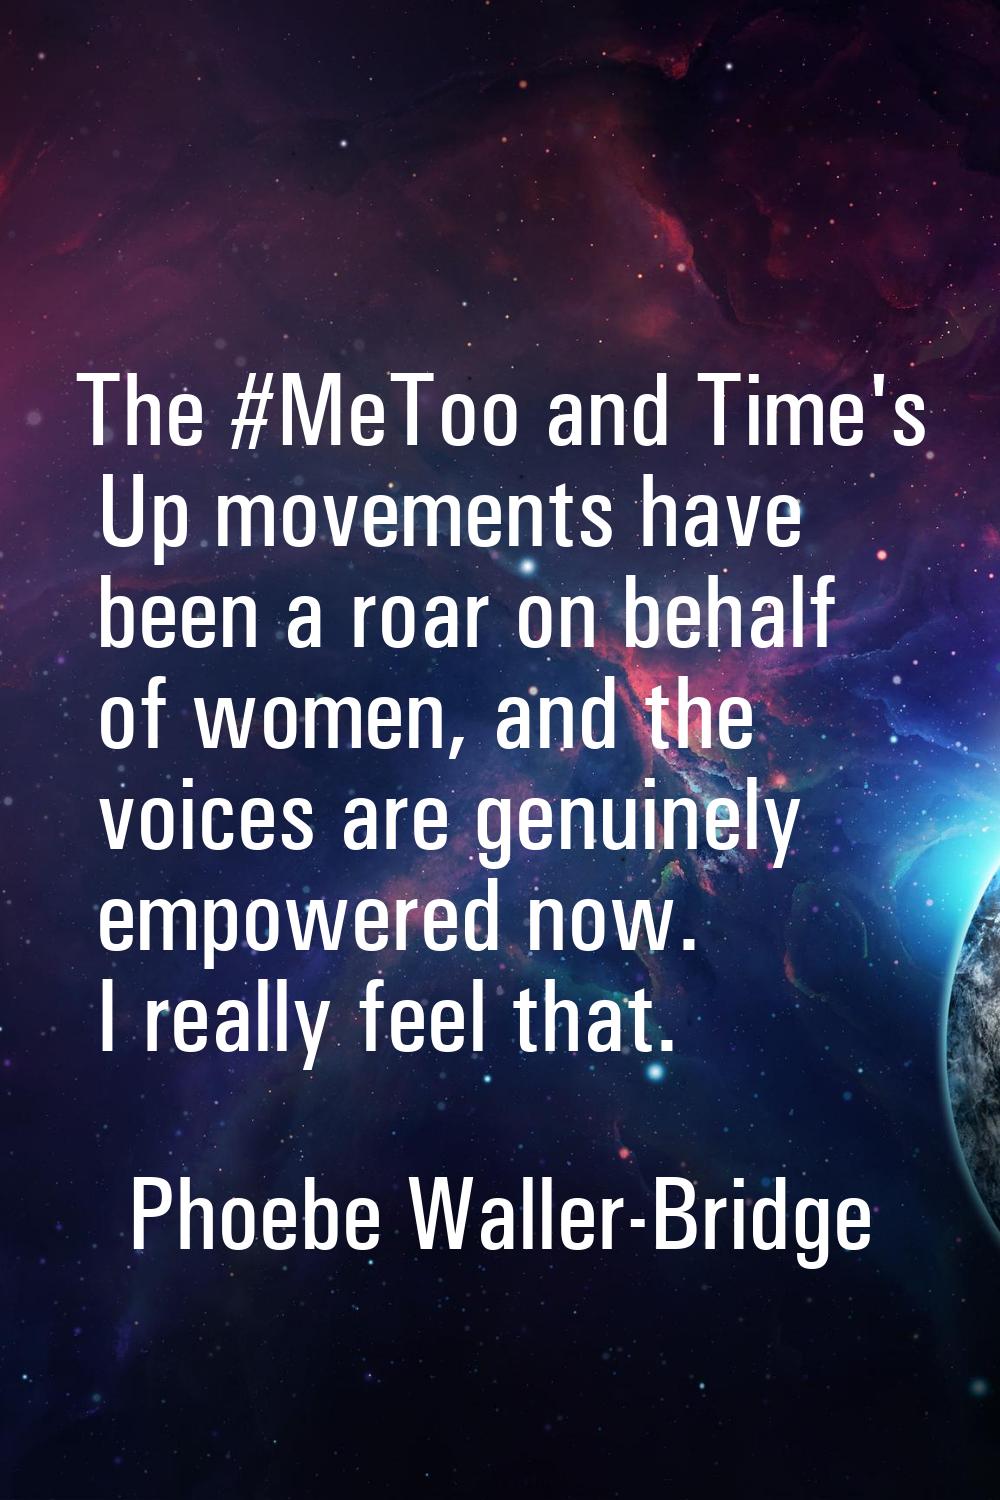 The #MeToo and Time's Up movements have been a roar on behalf of women, and the voices are genuinel